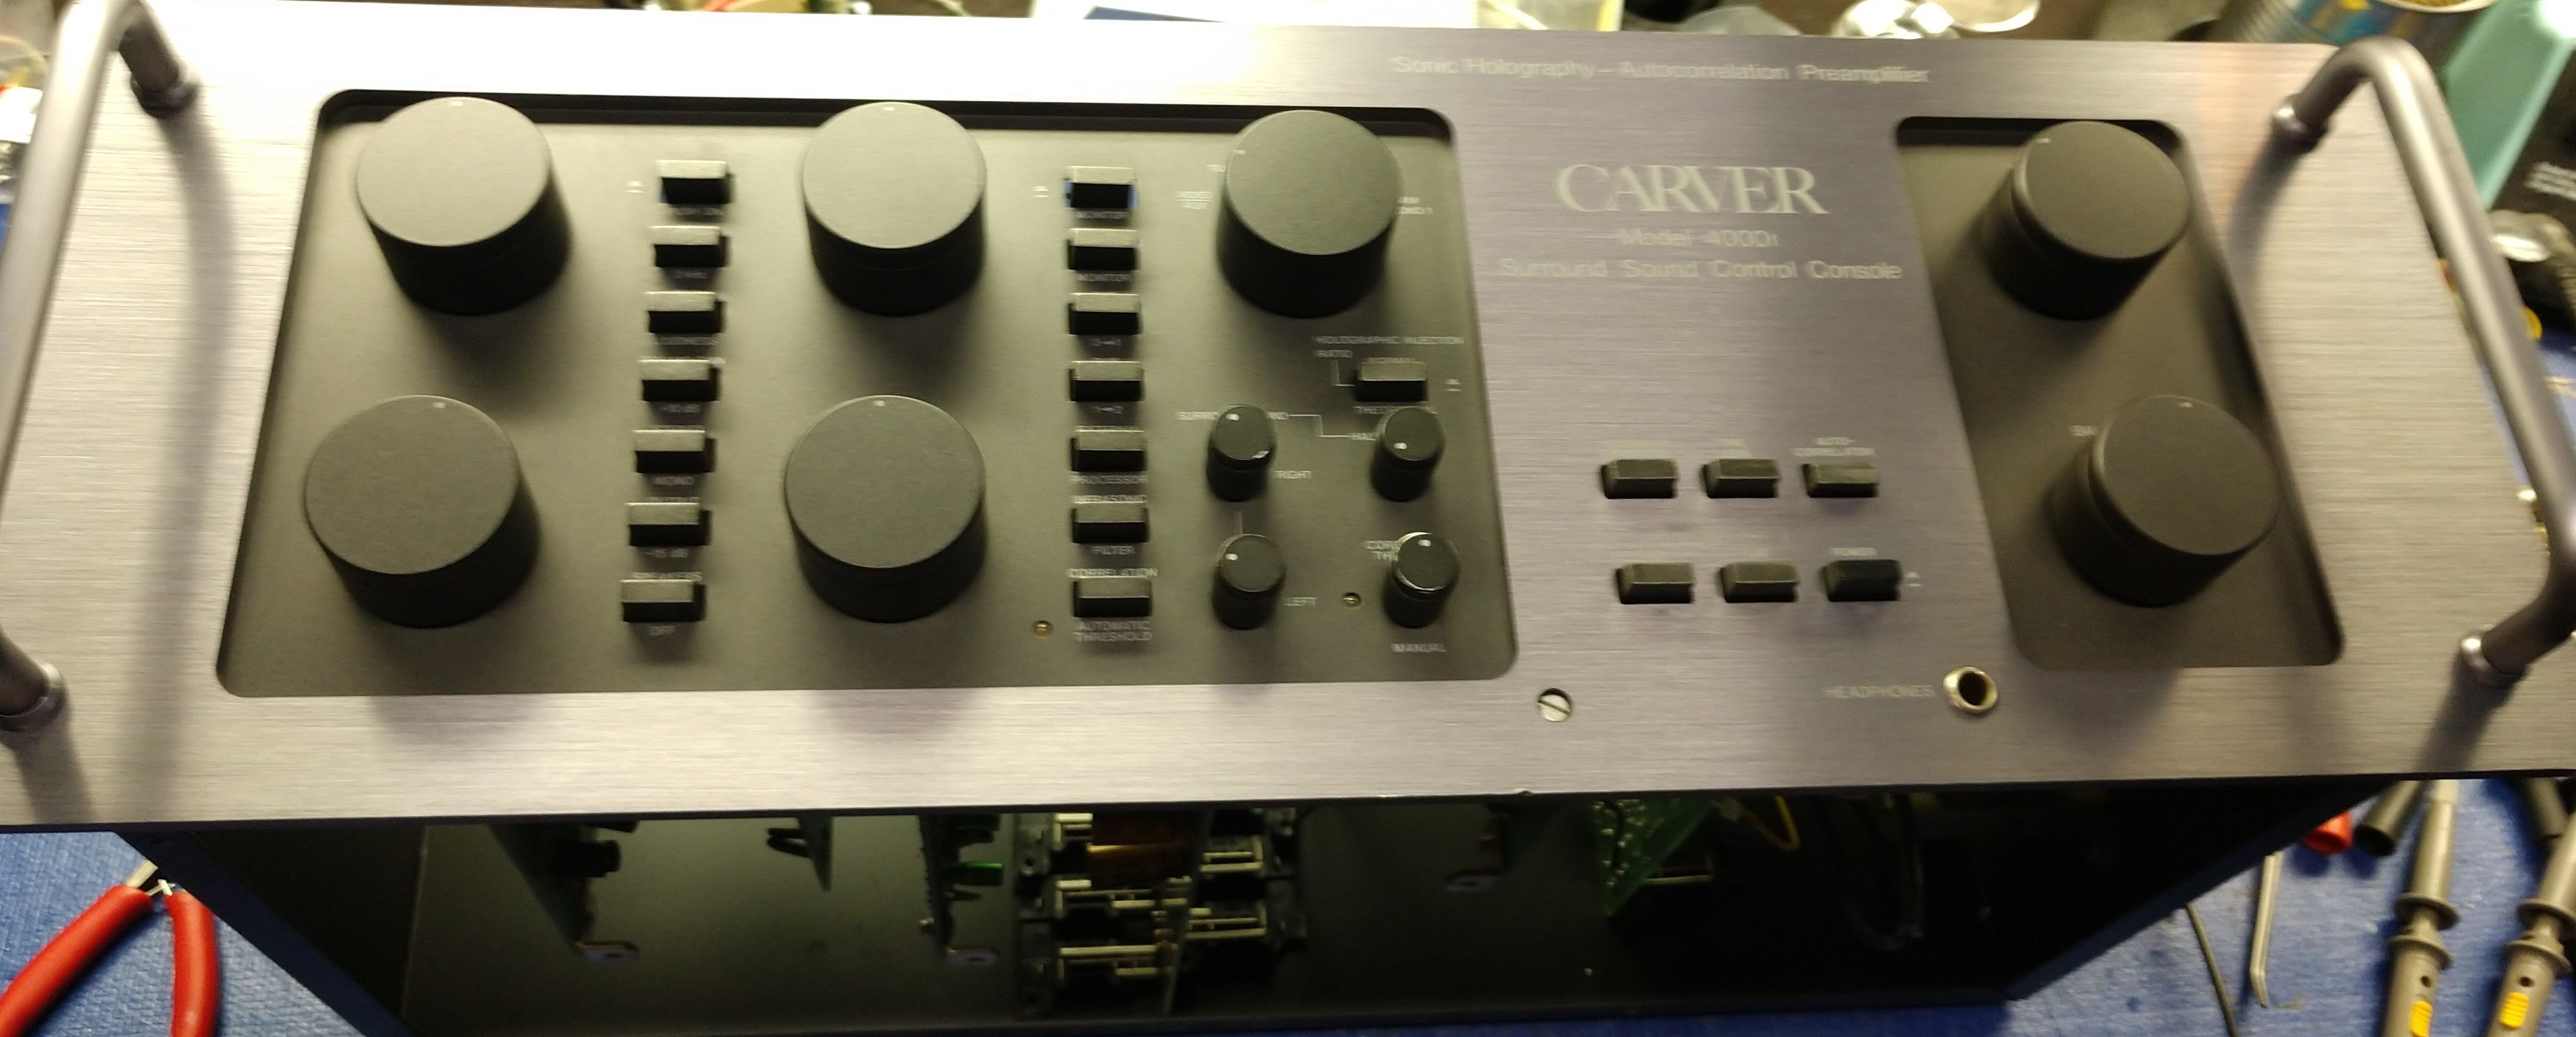 More information about "Carver C-4000/4000t Upgrade and Restore"